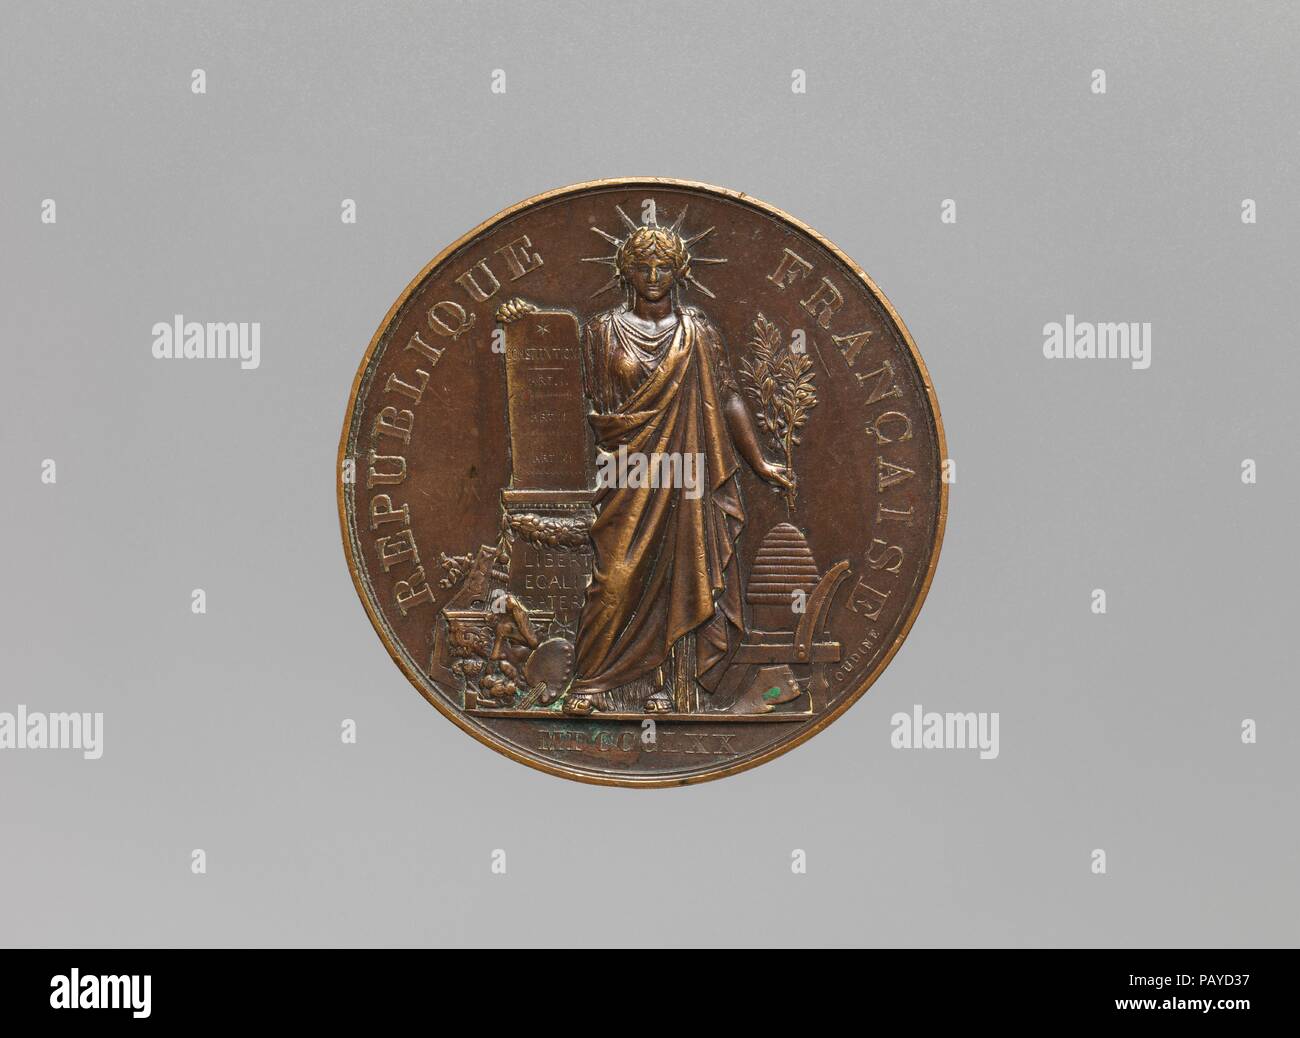 Medal Awarded to French Civilian Pigeon-Keepers (Colombiers civils). Artist: Medalist: Eugène-André Oudiné (French, Paris 1810-1887 Paris). Culture: French. Dimensions: Diameter (confirmed): 2 11/16 in. (6.8 cm). Date: 1870.  During the Franco-Prussian War of 1870-71, Paris came under siege by German forces. In order to communicate with the outside world, new postal technologies were devised, including the use of homing pigeons to carry messages in micro-film to and from the capital city. This struck copper medal was awarded to civilian pigeon-keepers ('colombiers civils') by the French Minist Stock Photo